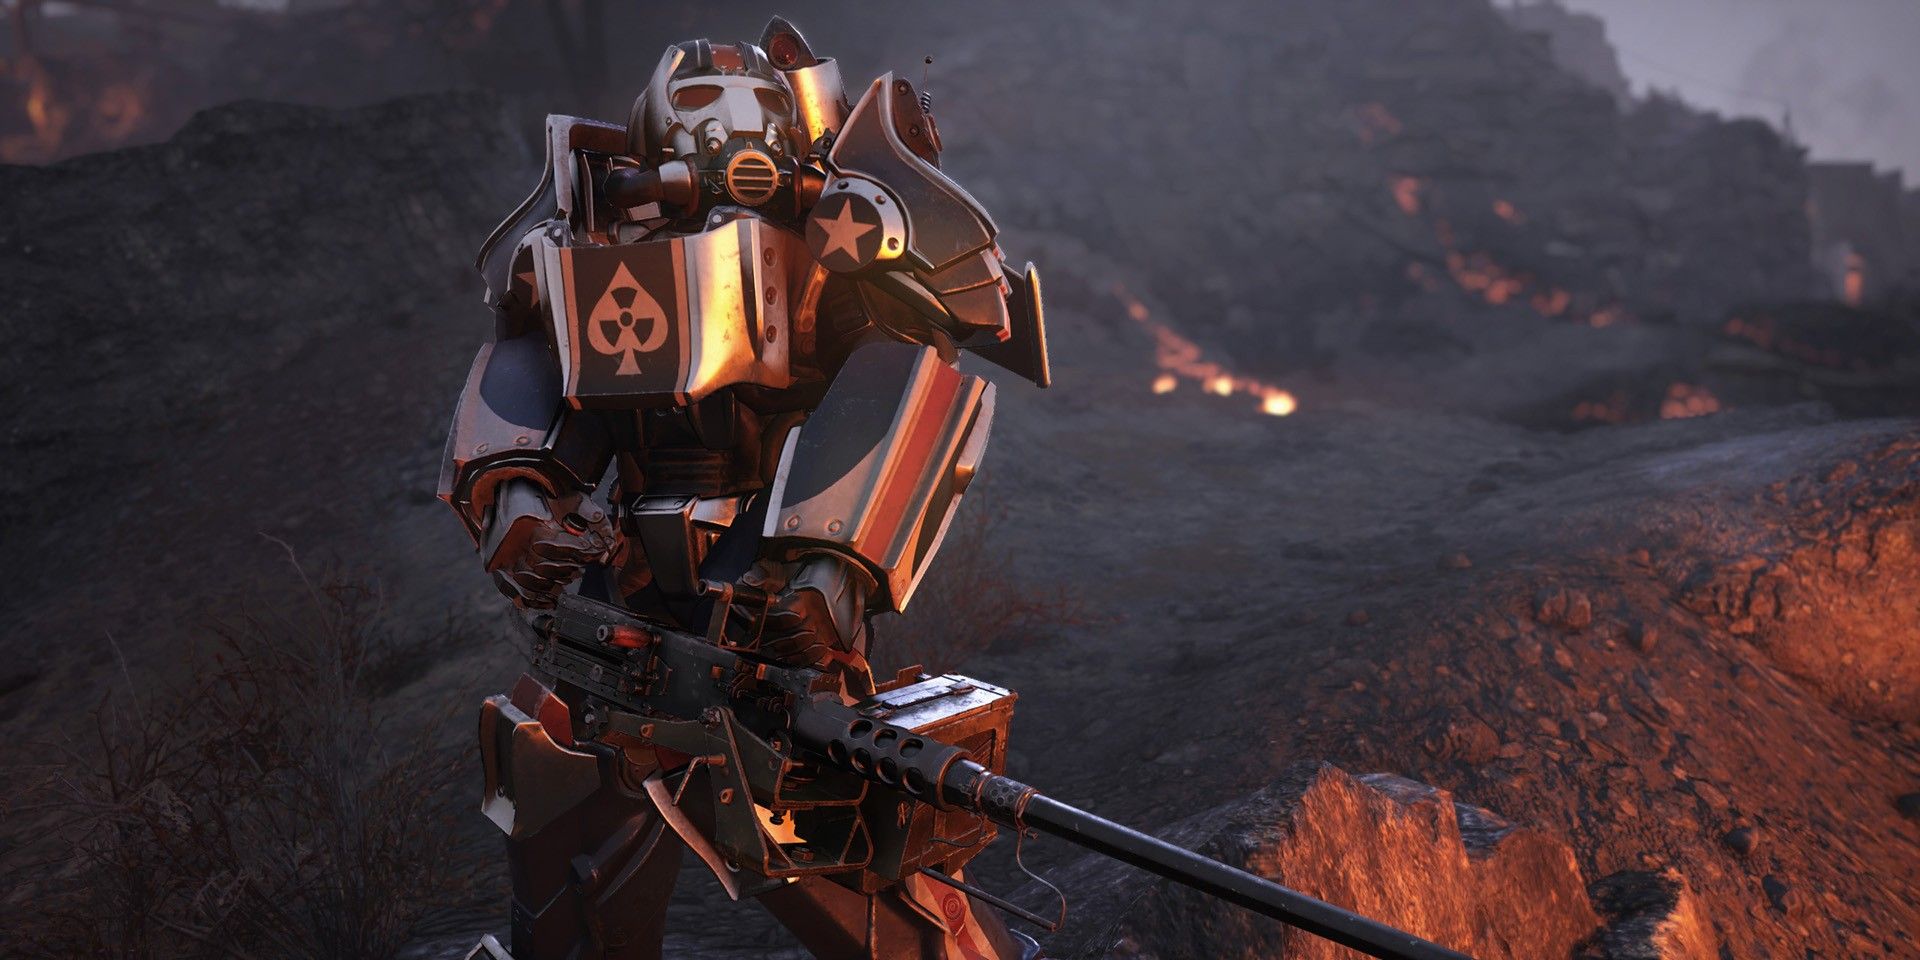 Armor Ace Power armor from Fallout 76